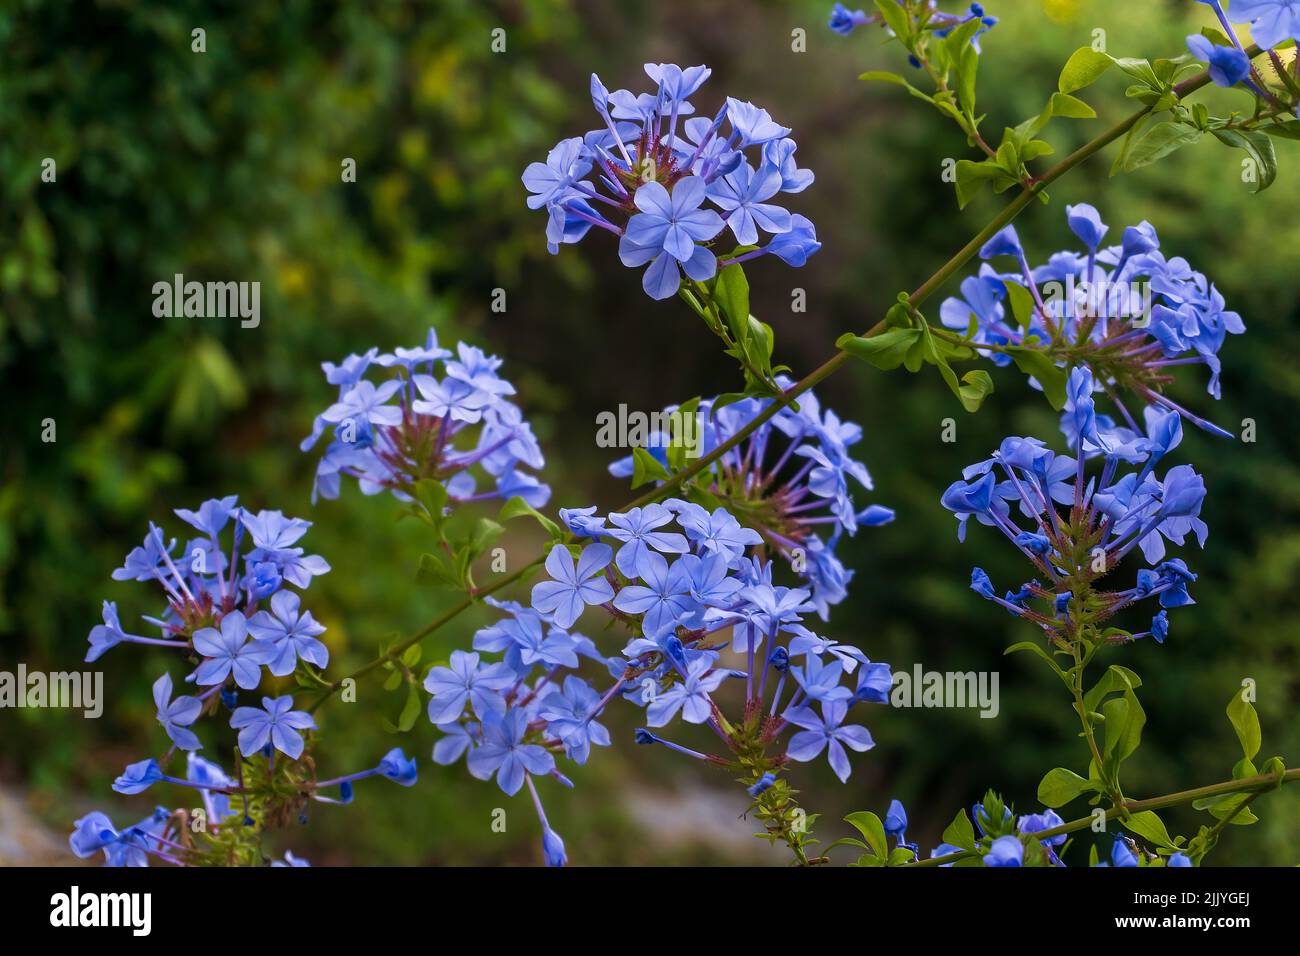 Blooming bush plumbago auriculata with pale blue flowers Stock Photo